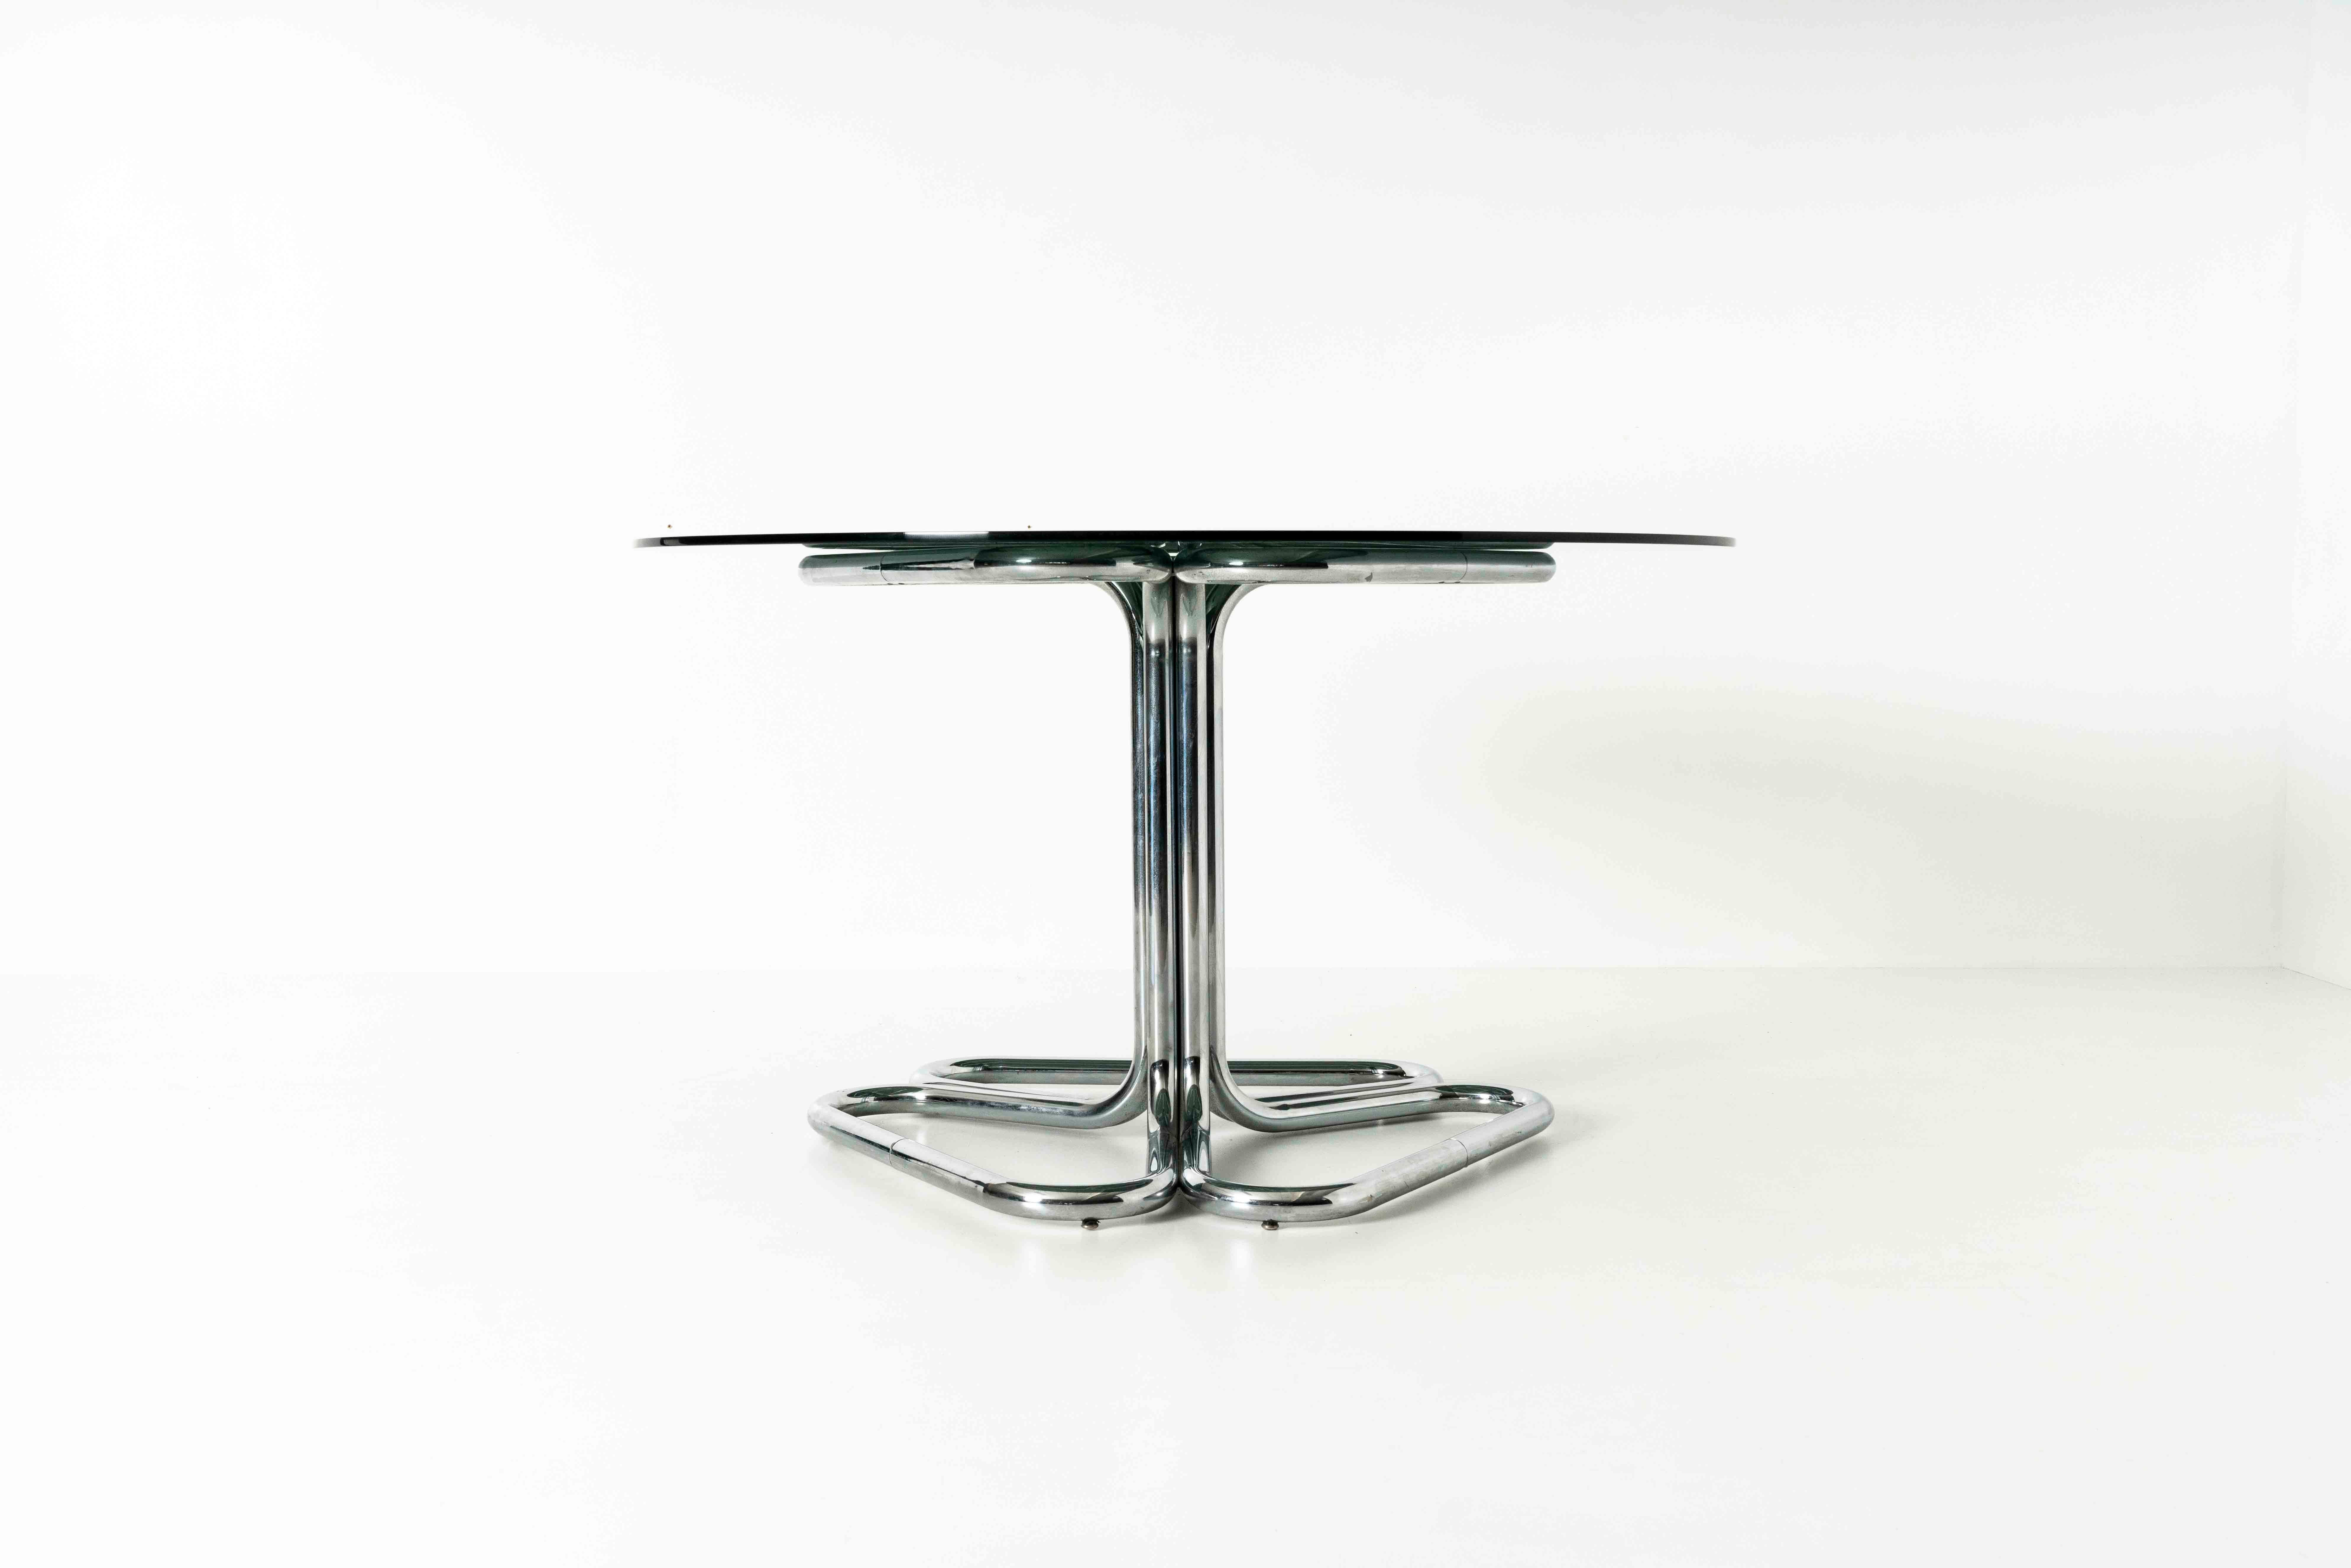 Nice dining room table by Giotto Stoppino from Italy, the 1970s. This table features a chromed tubular base in an attractive, triangular shape with a smoked glass top. We also have a matching Giotto Stoppino dining room chair set available. The